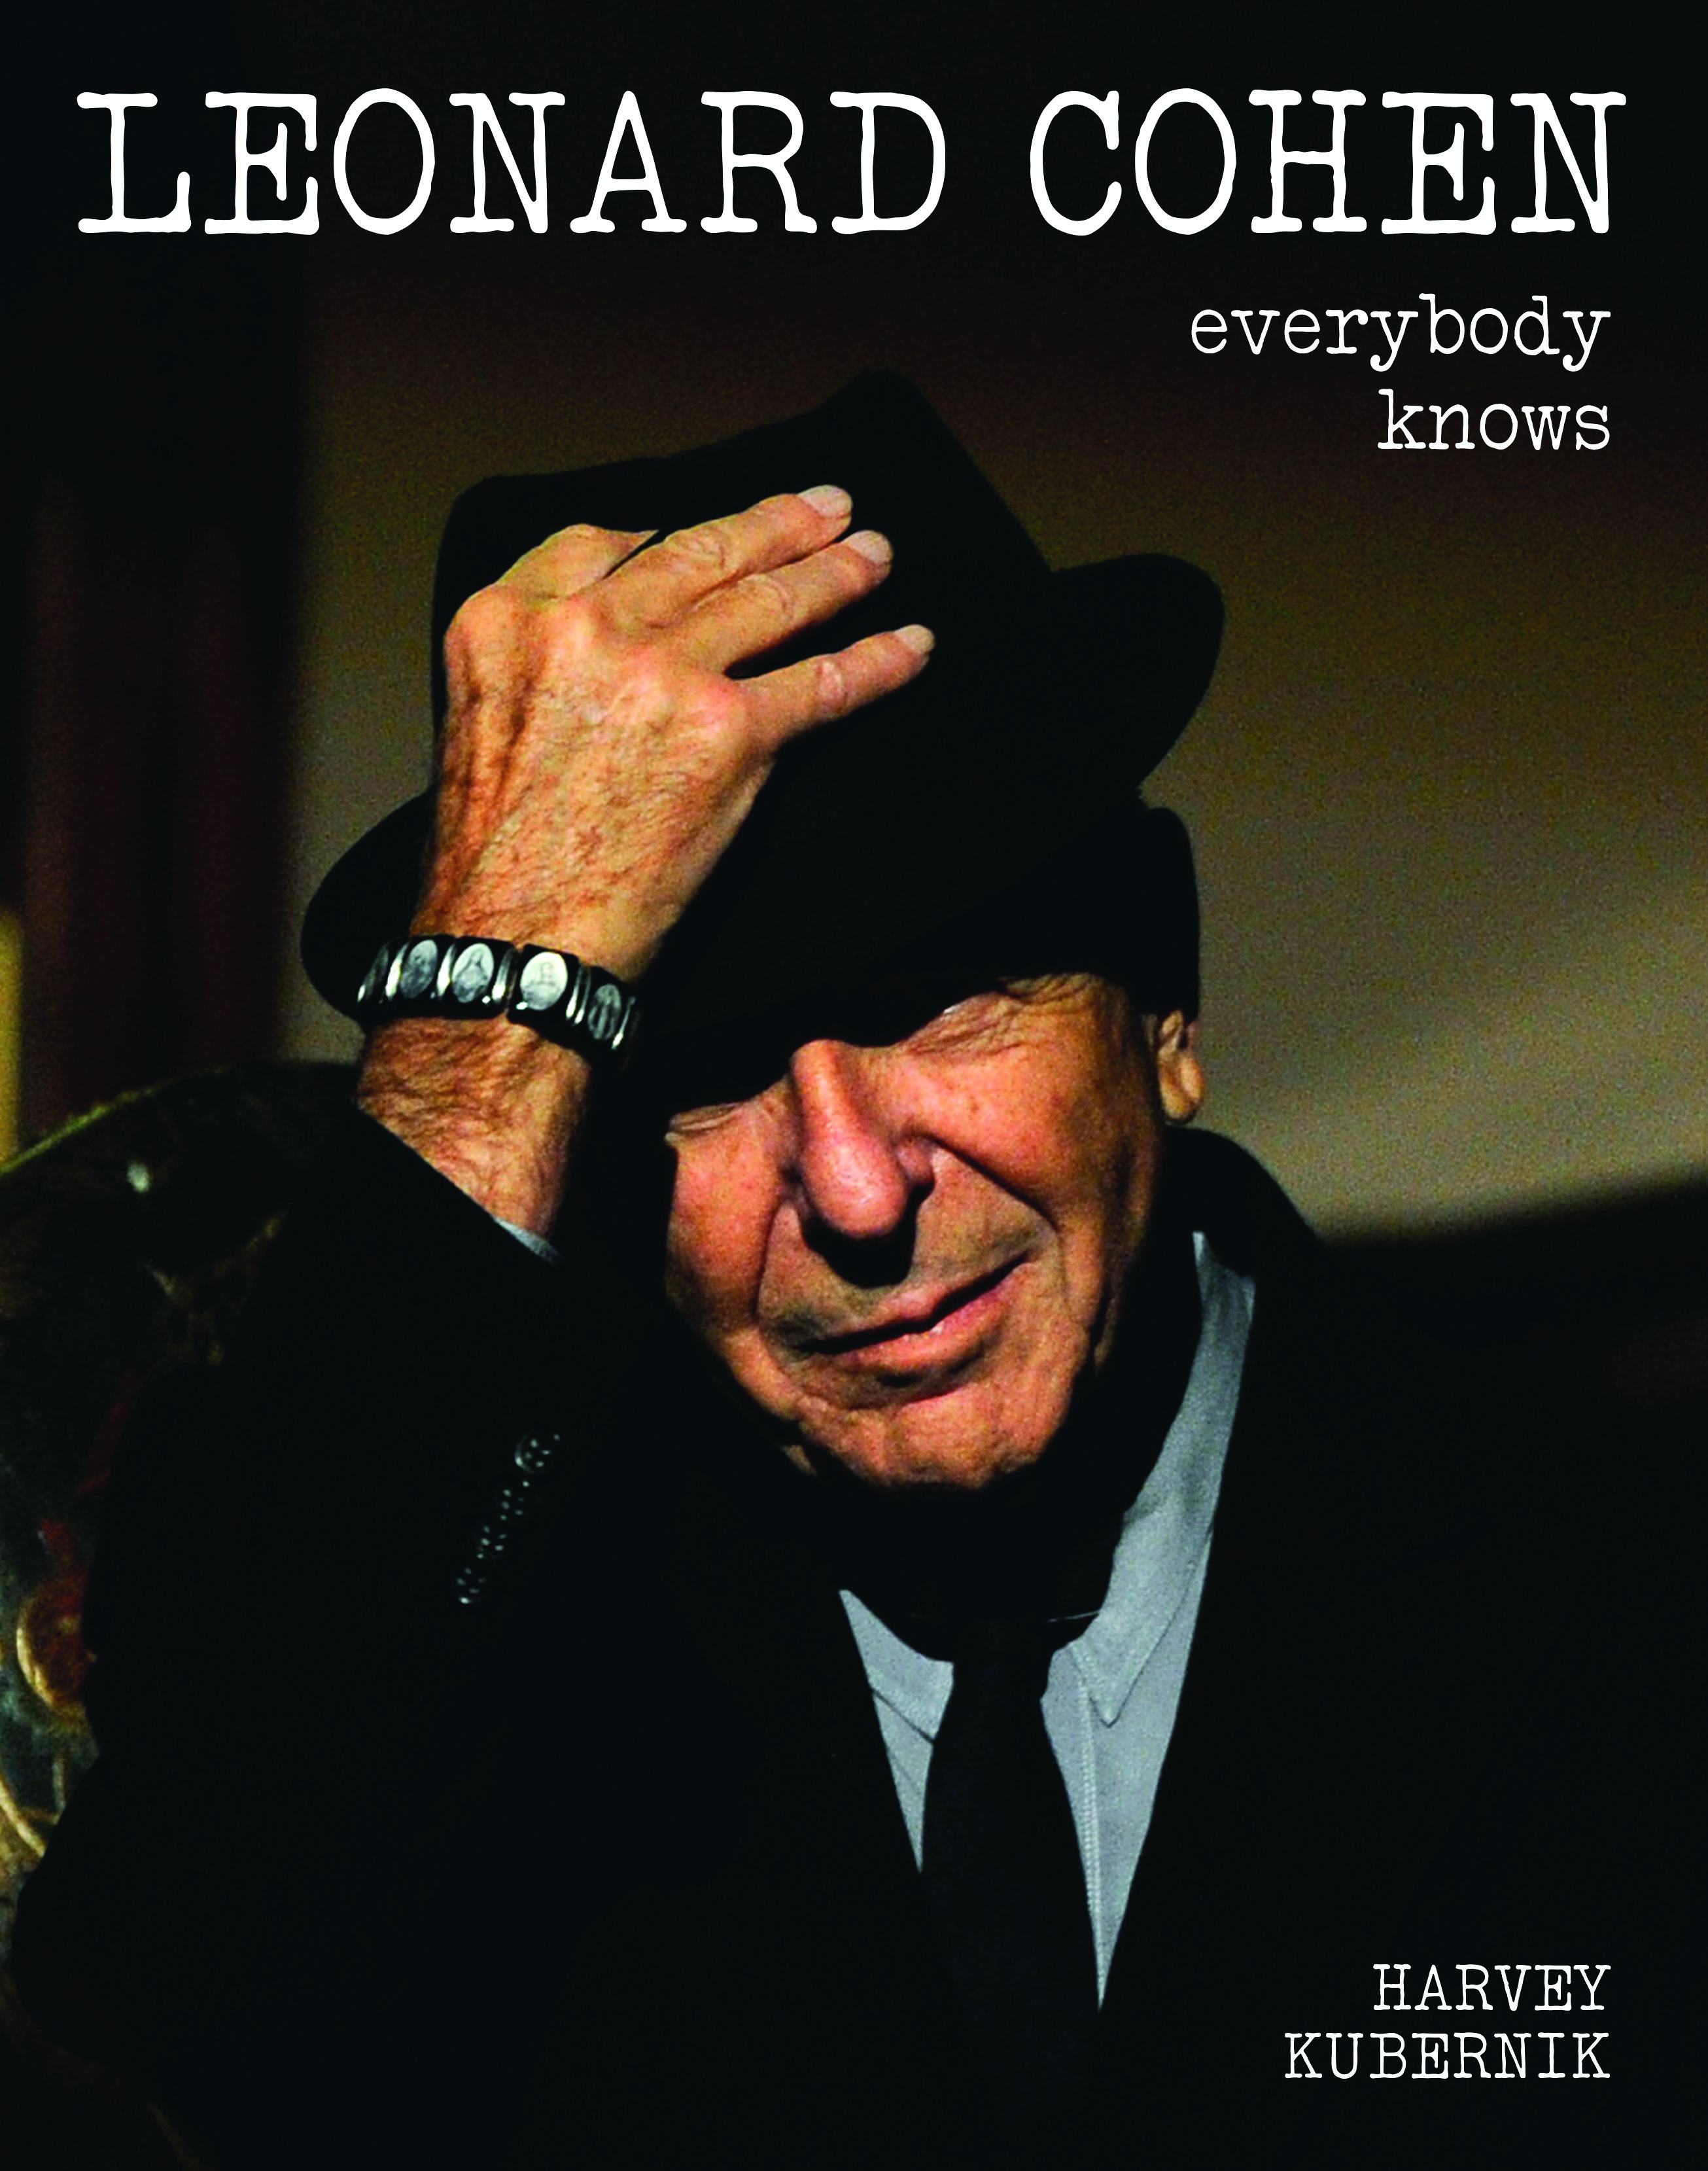 Leonard Cohen: One Year After